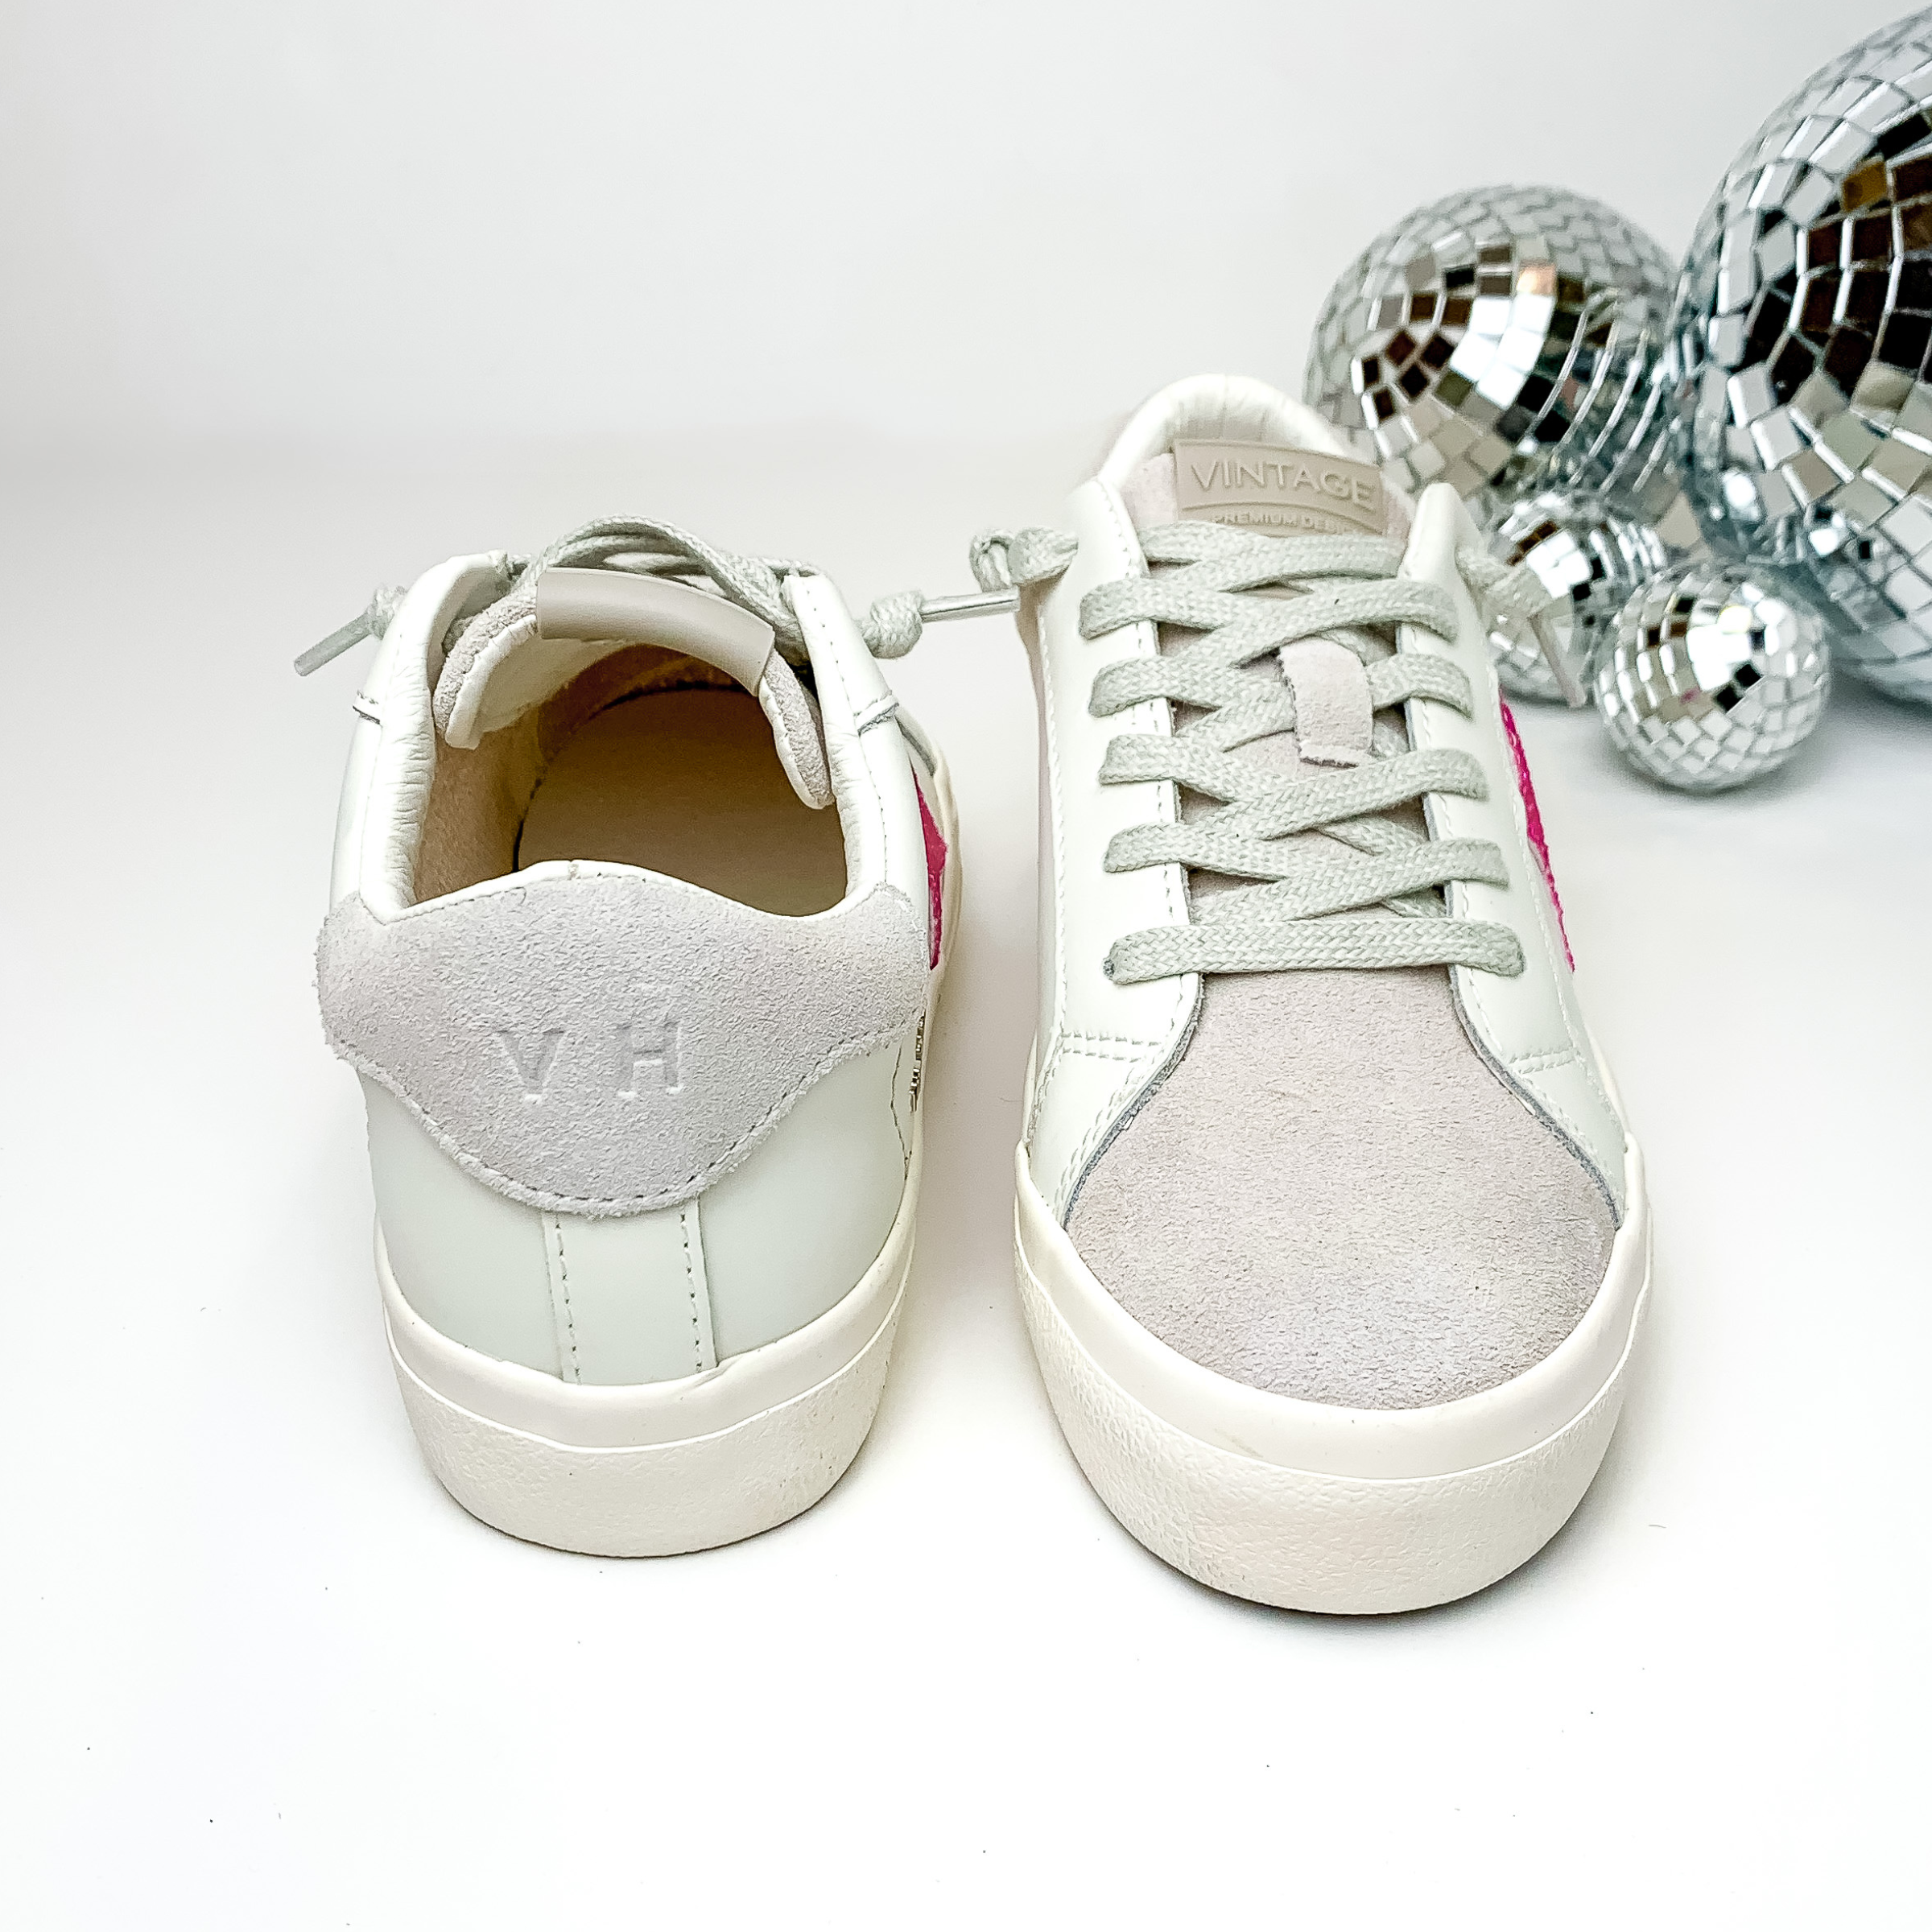 Vintage Havana | Orna Sneakers in Pink Pop - Giddy Up Glamour Boutique